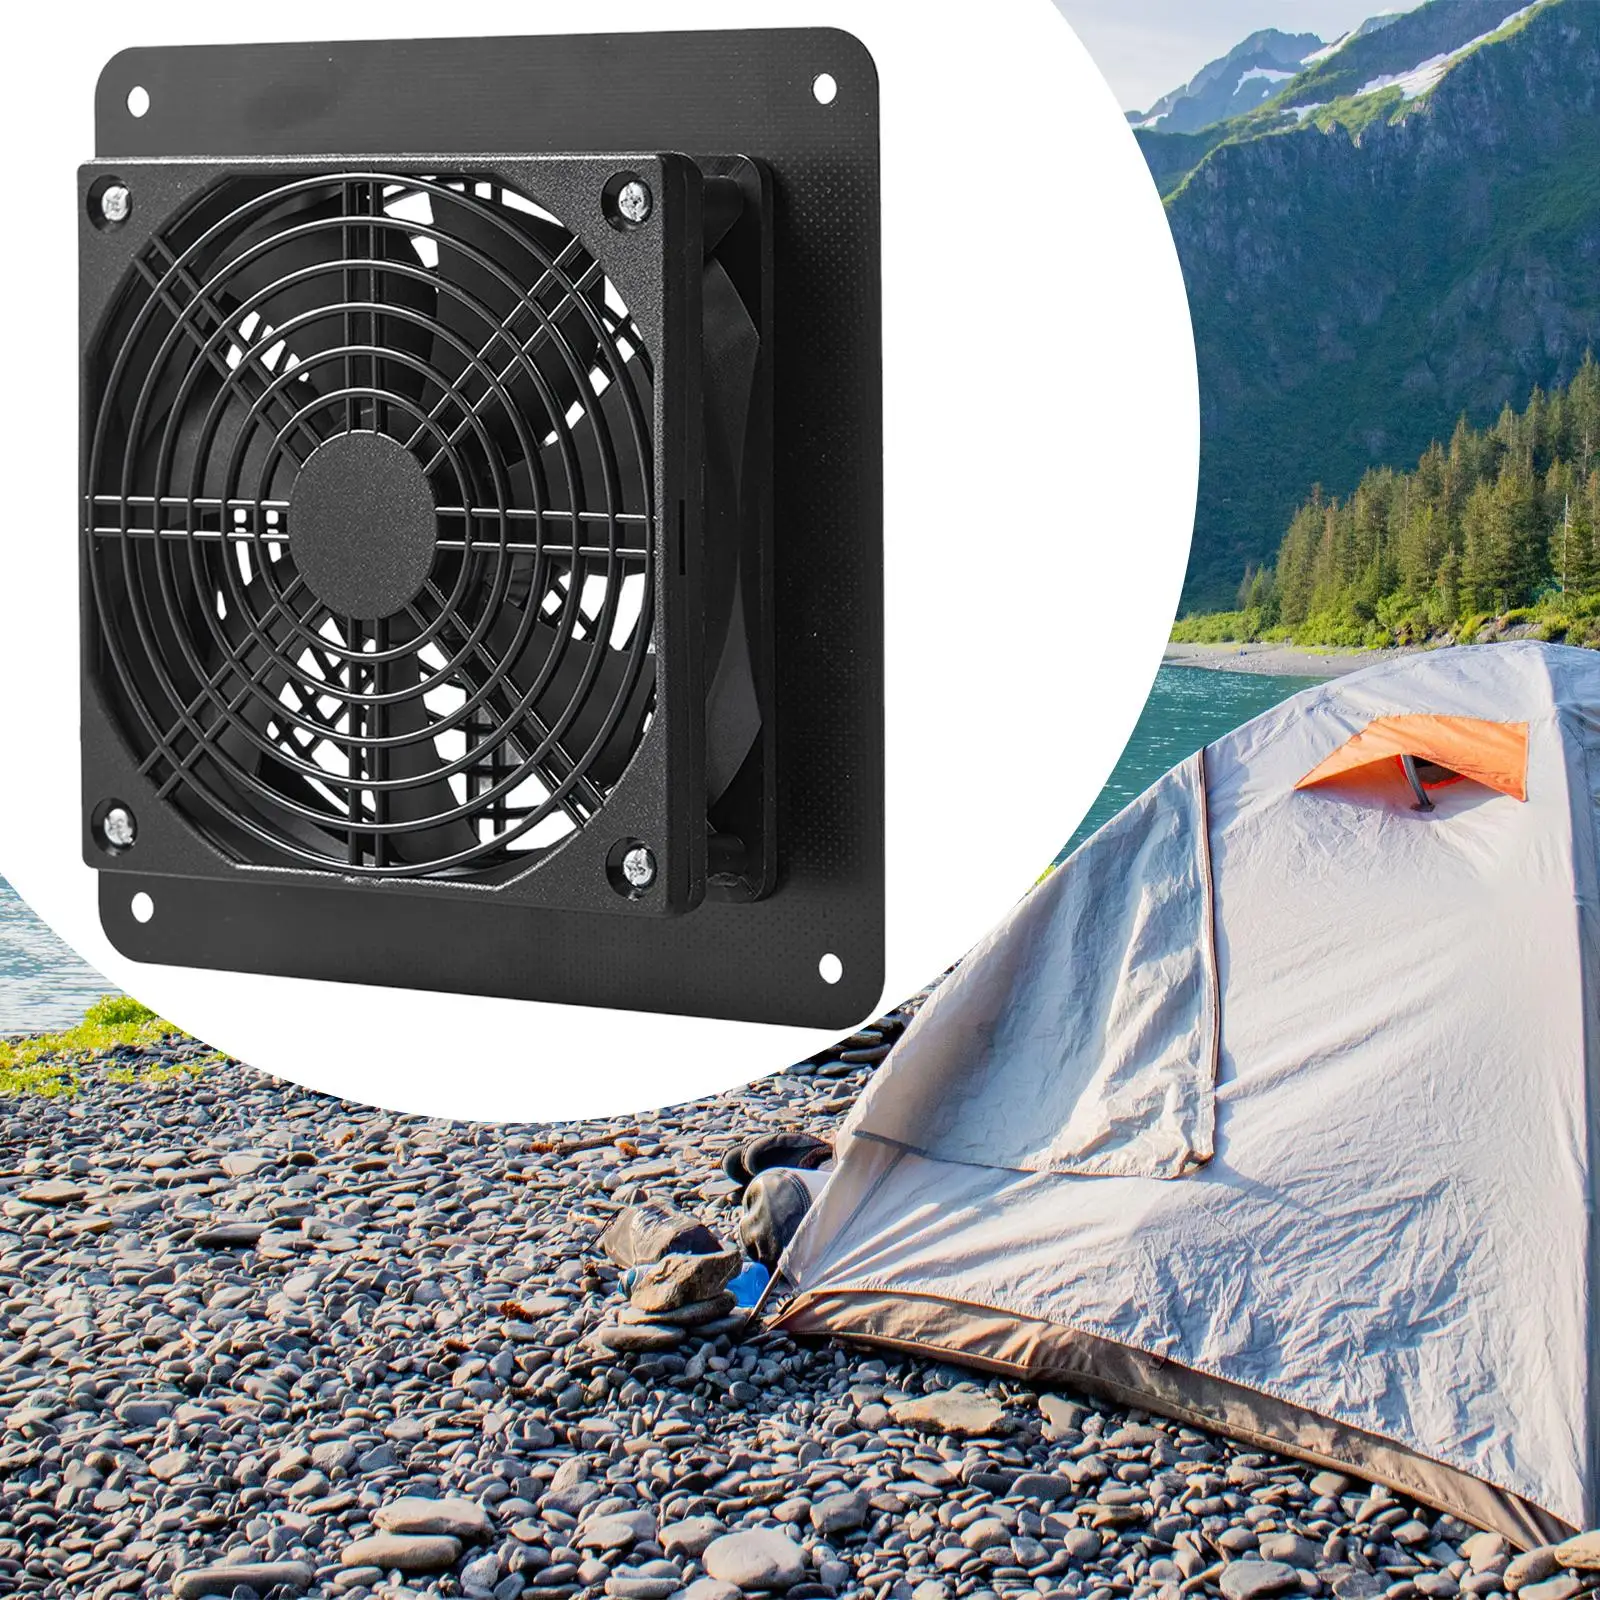 Ventilator Fans Portable Square Blower Free Energy for Sheds Office